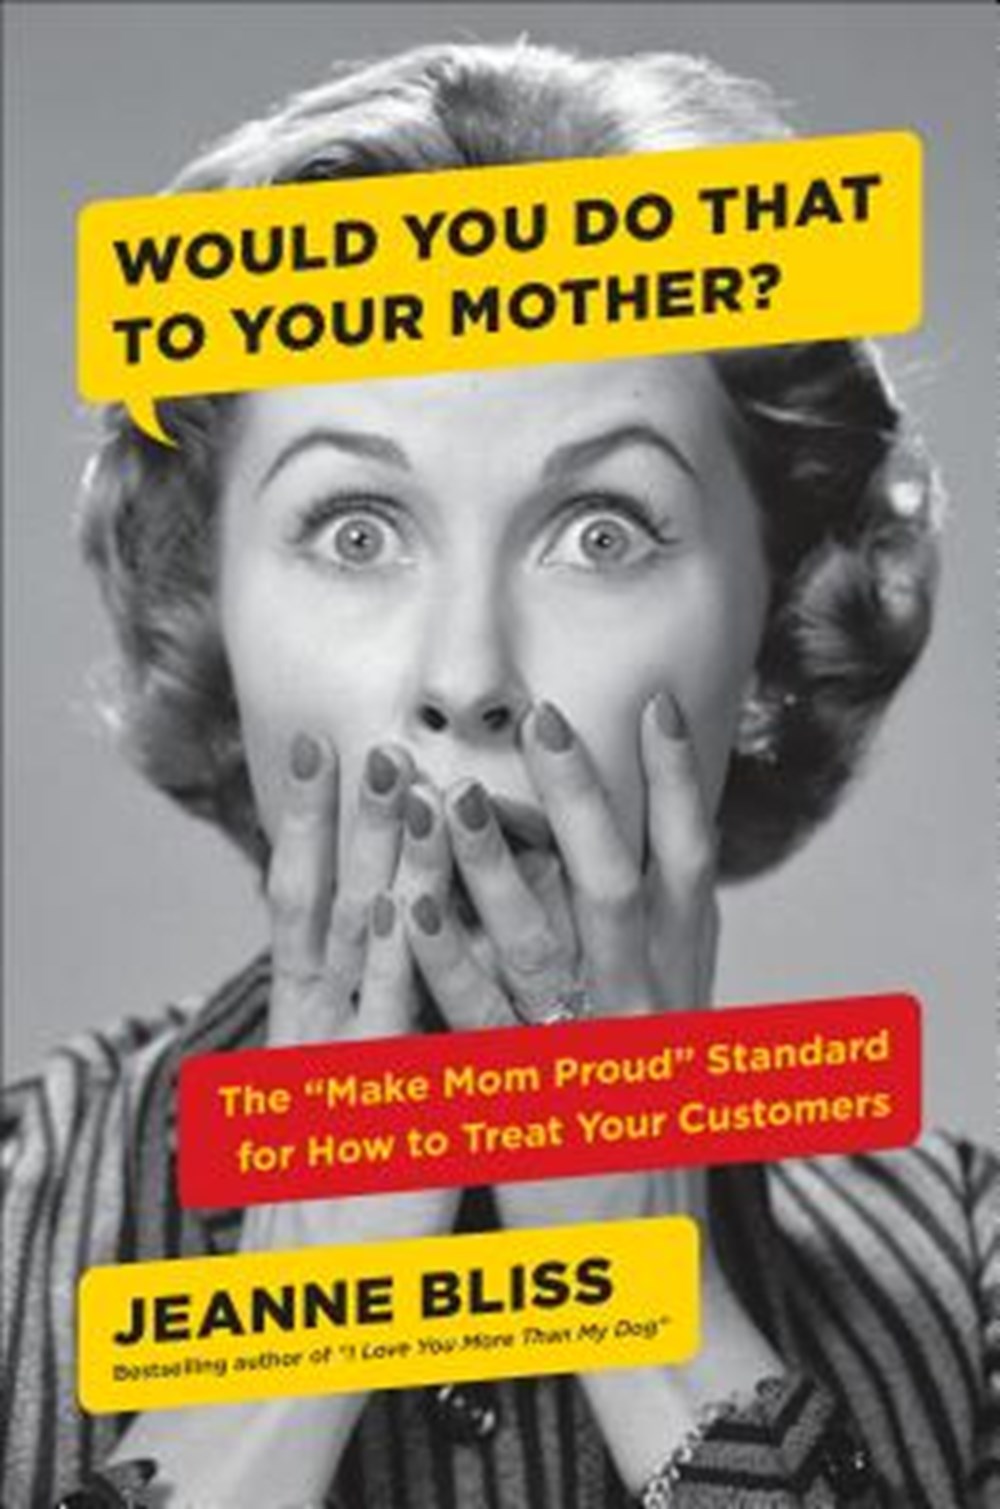 Would You Do That to Your Mother? The Make Mom Proud Standard for How to Treat Your Customers